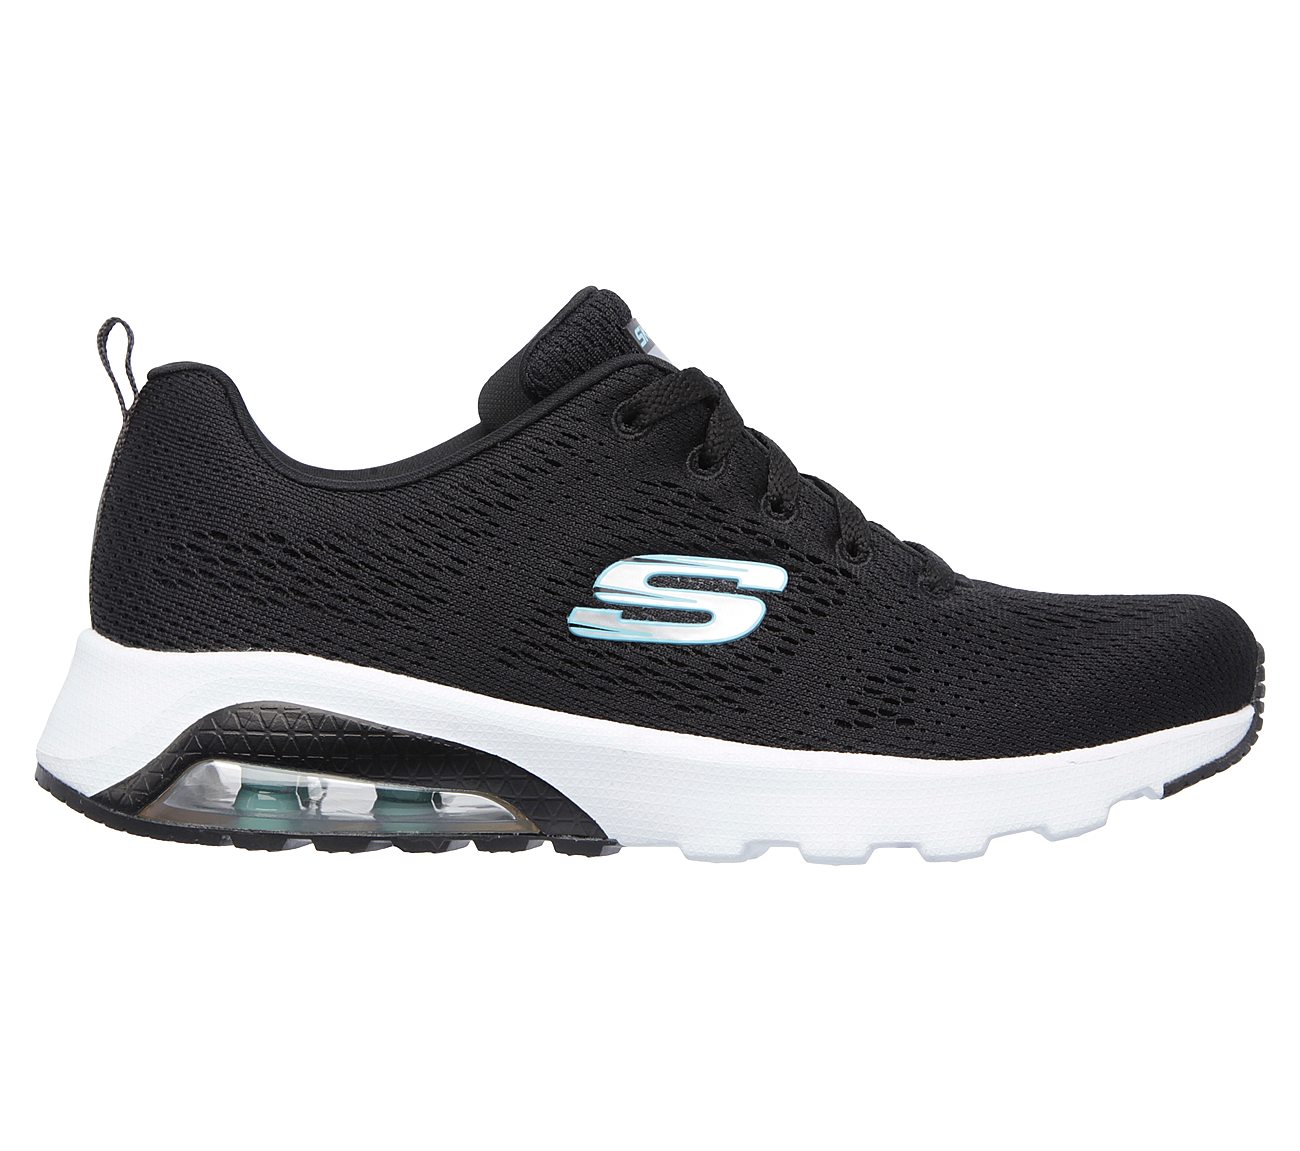 Buy SKECHERS Skech-Air Extreme - Evolve Sport Shoes